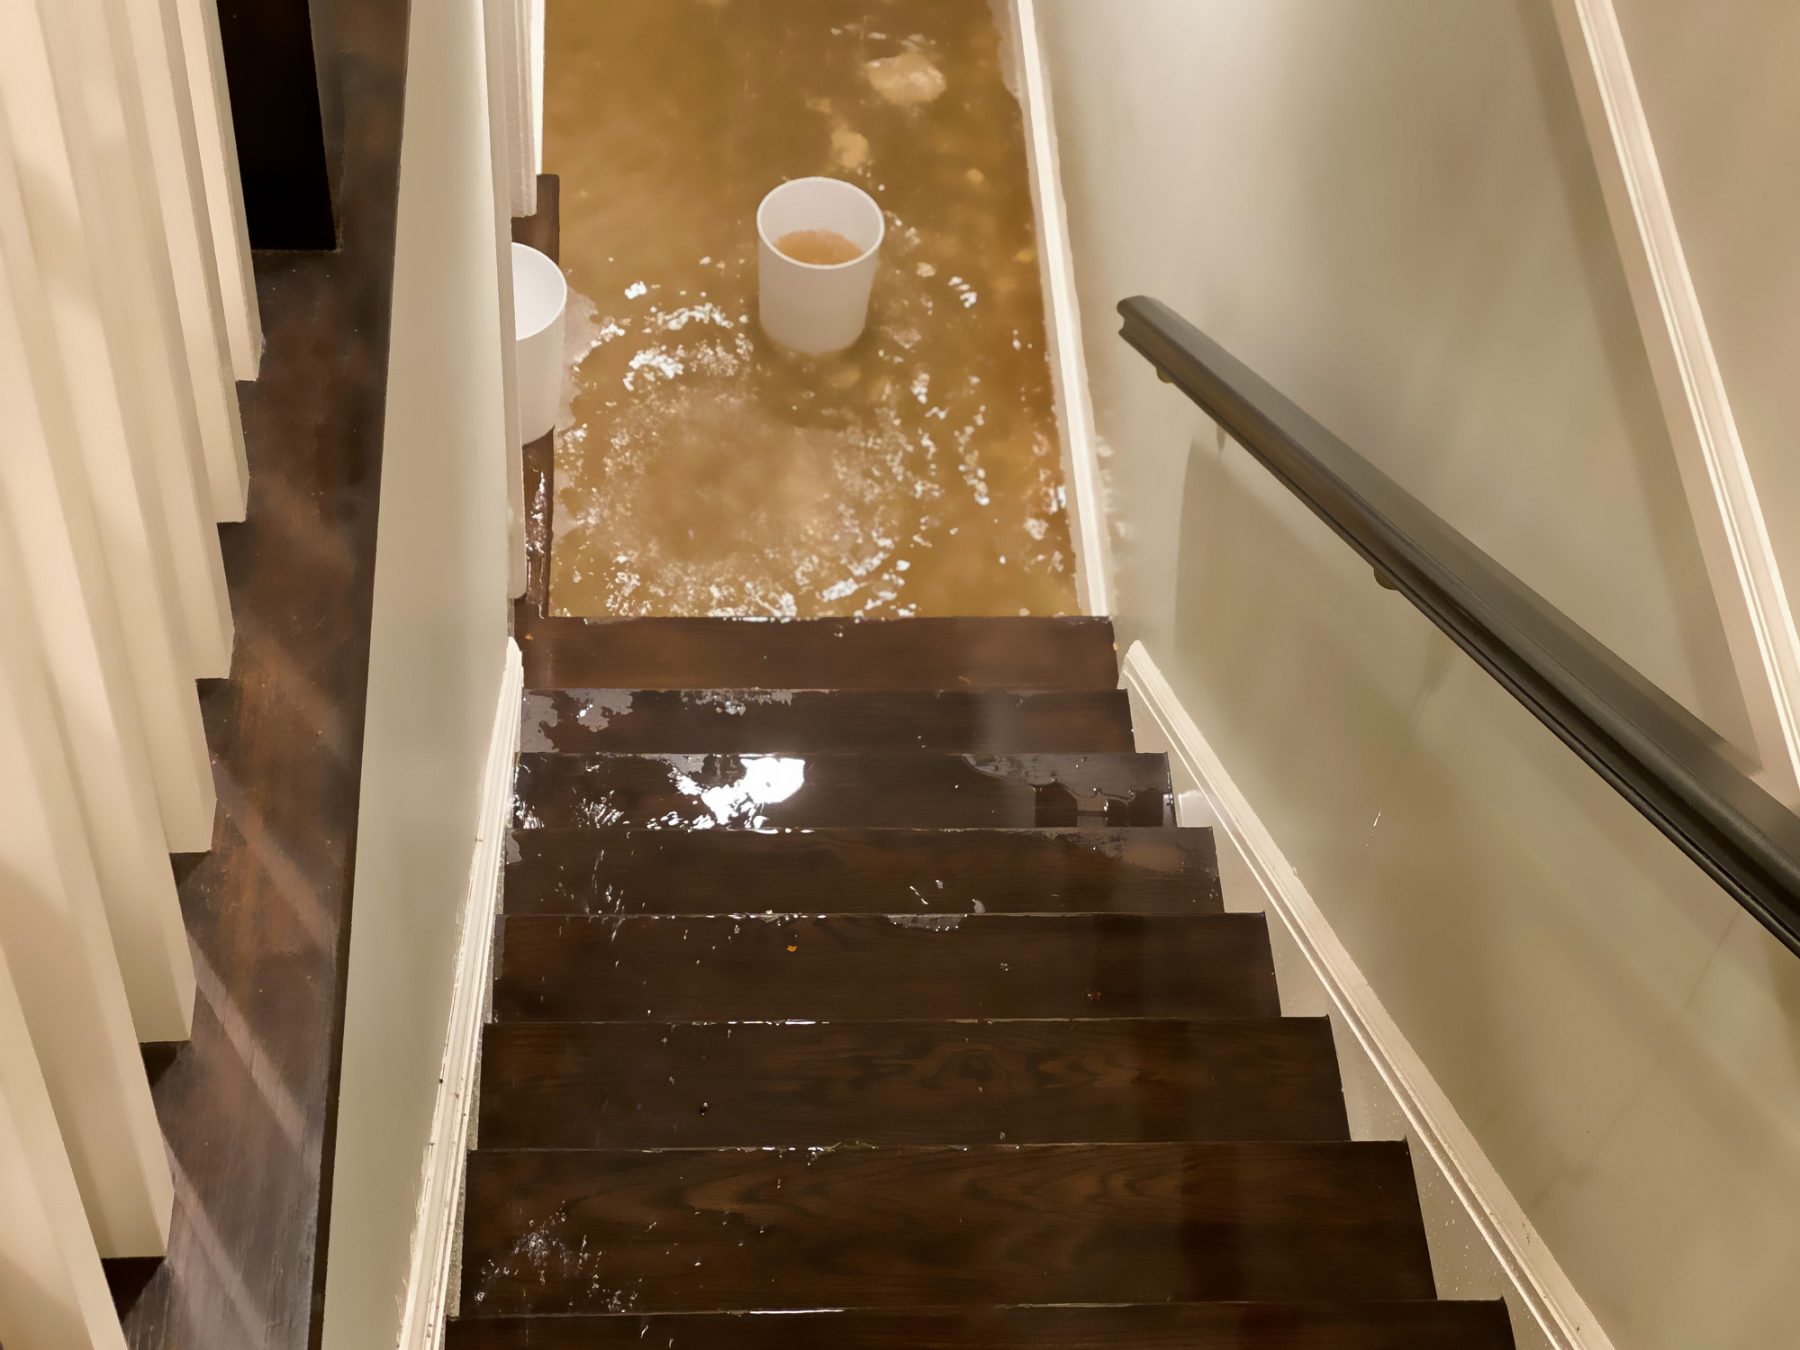 Water builds up on the bottom floor of a home causing water damage.